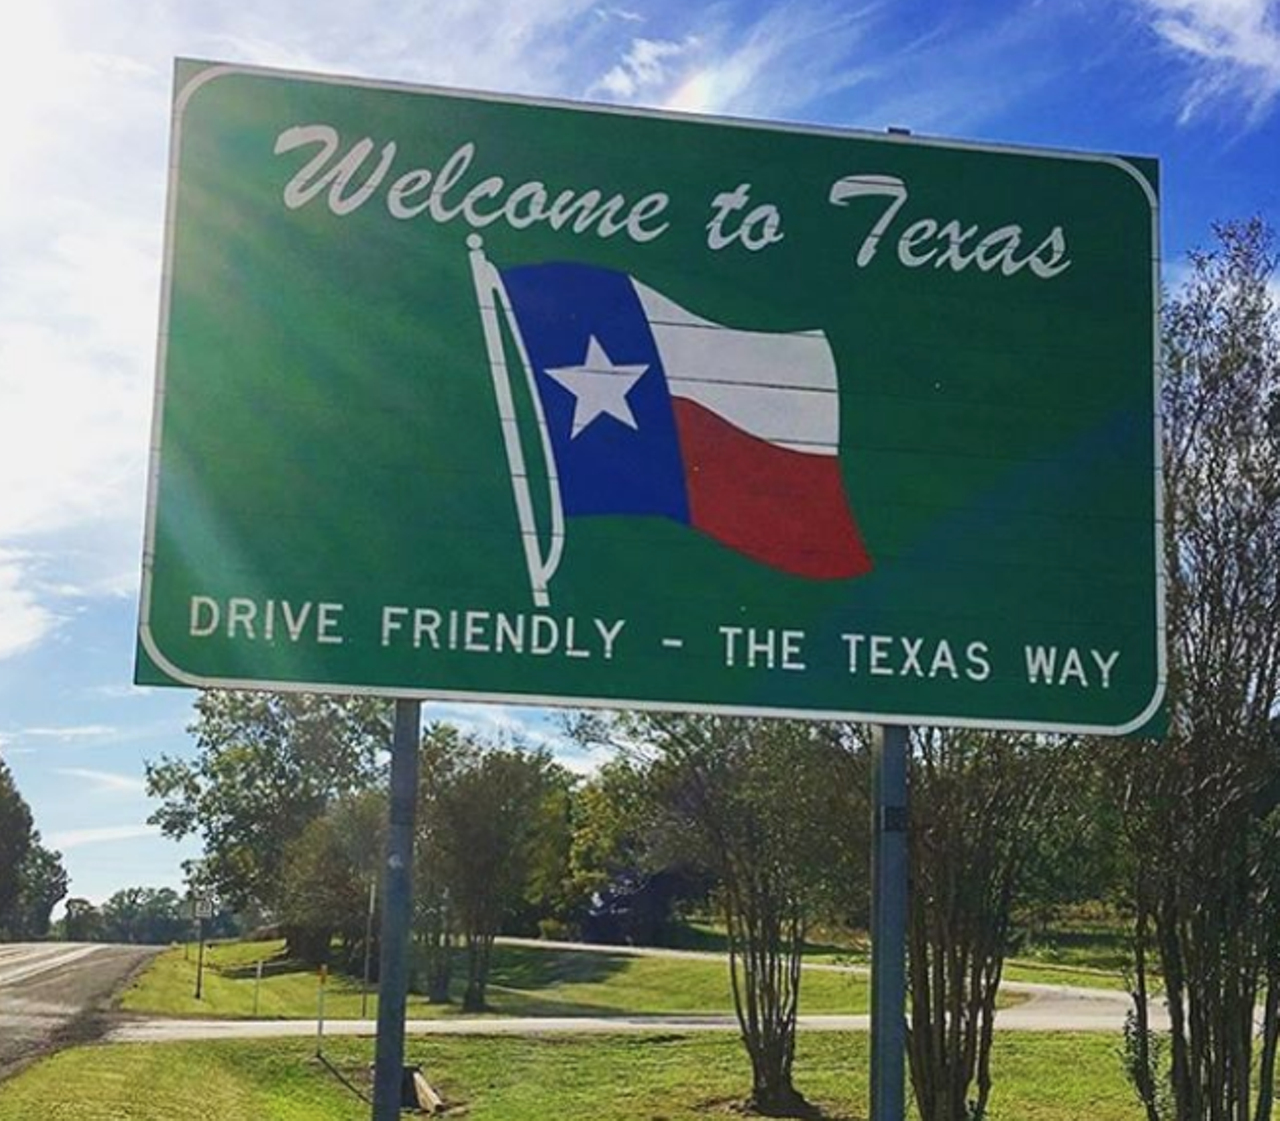 Texas was the 28th state to join the U.S.
Texas ended the year by joining the Union on December 29, 1845, making it the 28th U.S. state. It’s also the only state to enter the U.S. by treaty, rather than territorial annexation like most other states. After seceding and fighting for the Confederacy during the Civil War, Texas was readmitted to the Union in 1870.
Photo via Instagram / bobbyparsa